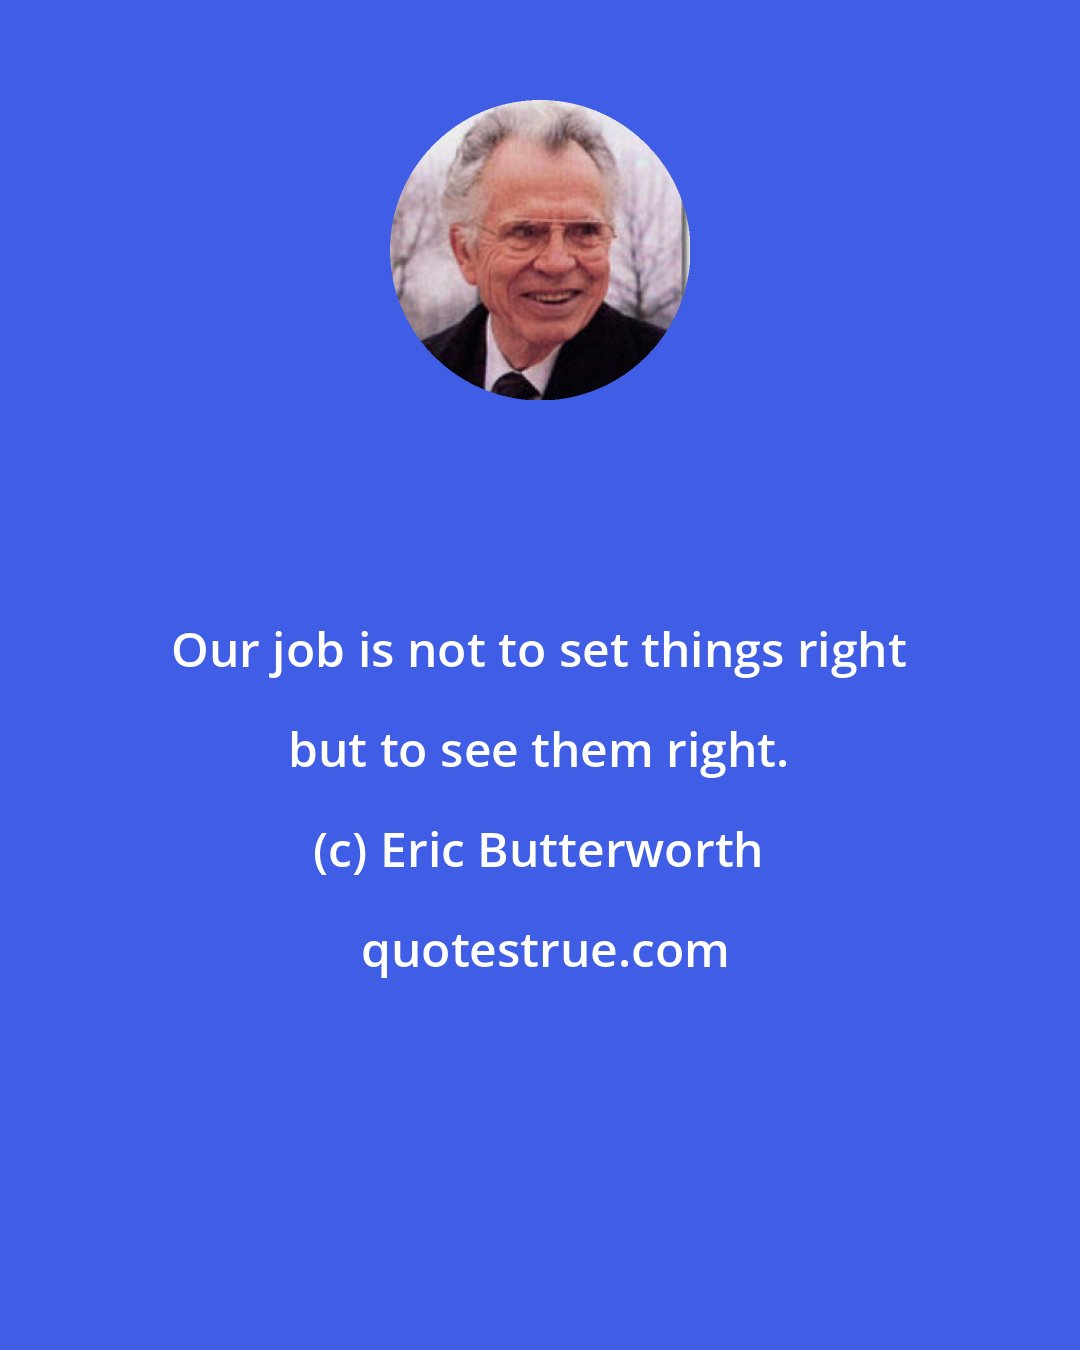 Eric Butterworth: Our job is not to set things right but to see them right.